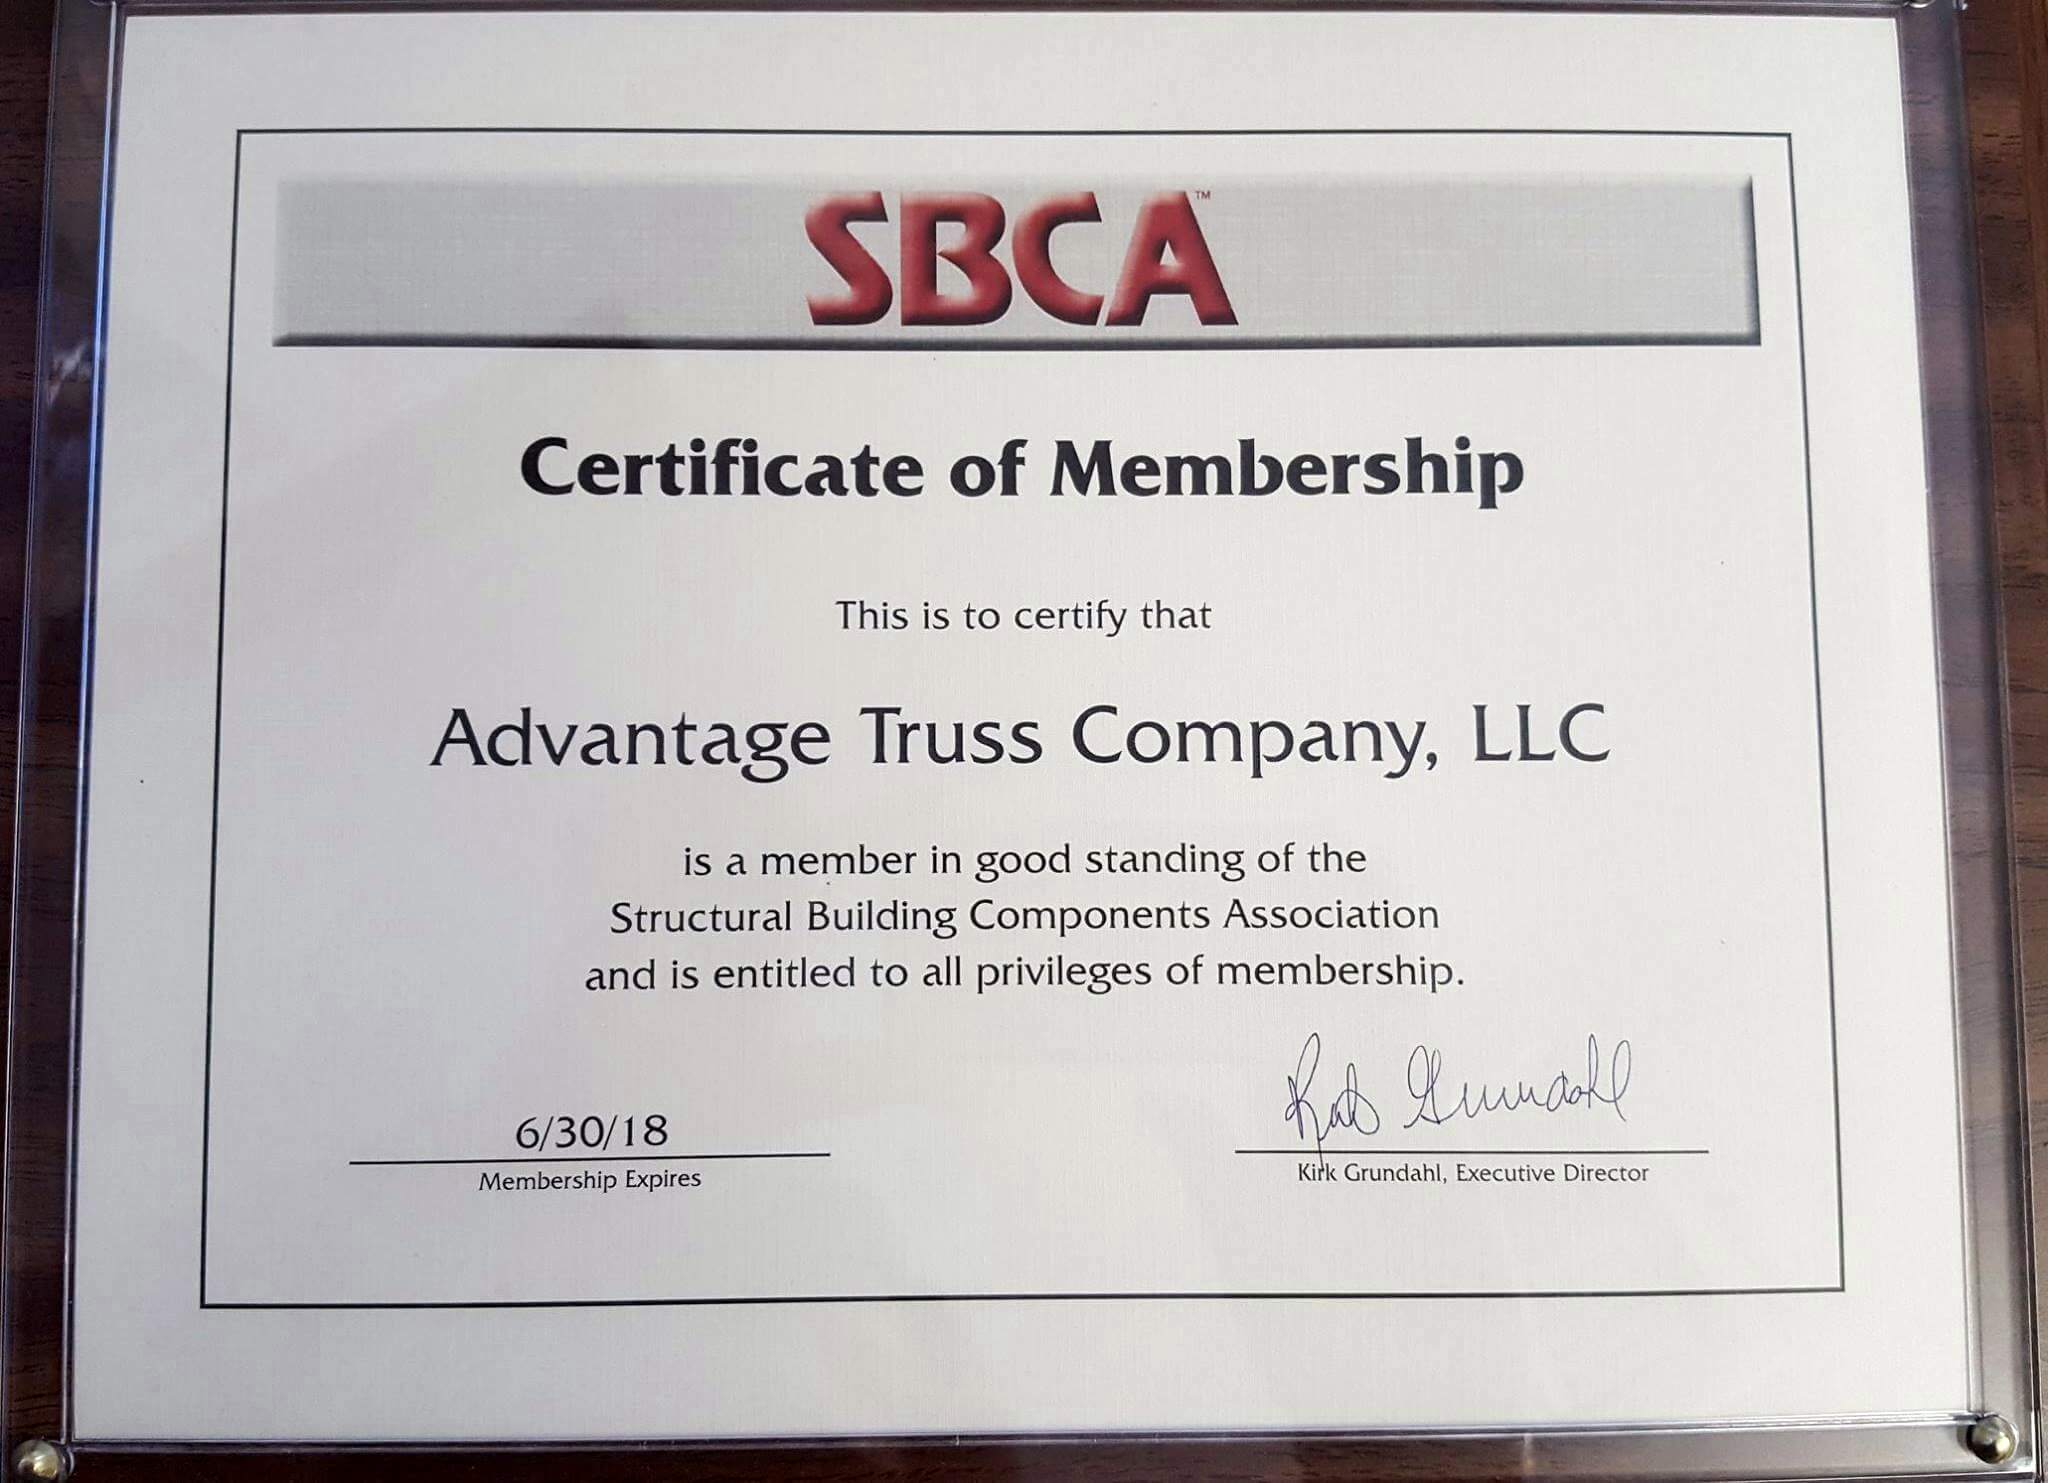 Membership in Structural Building Component Association